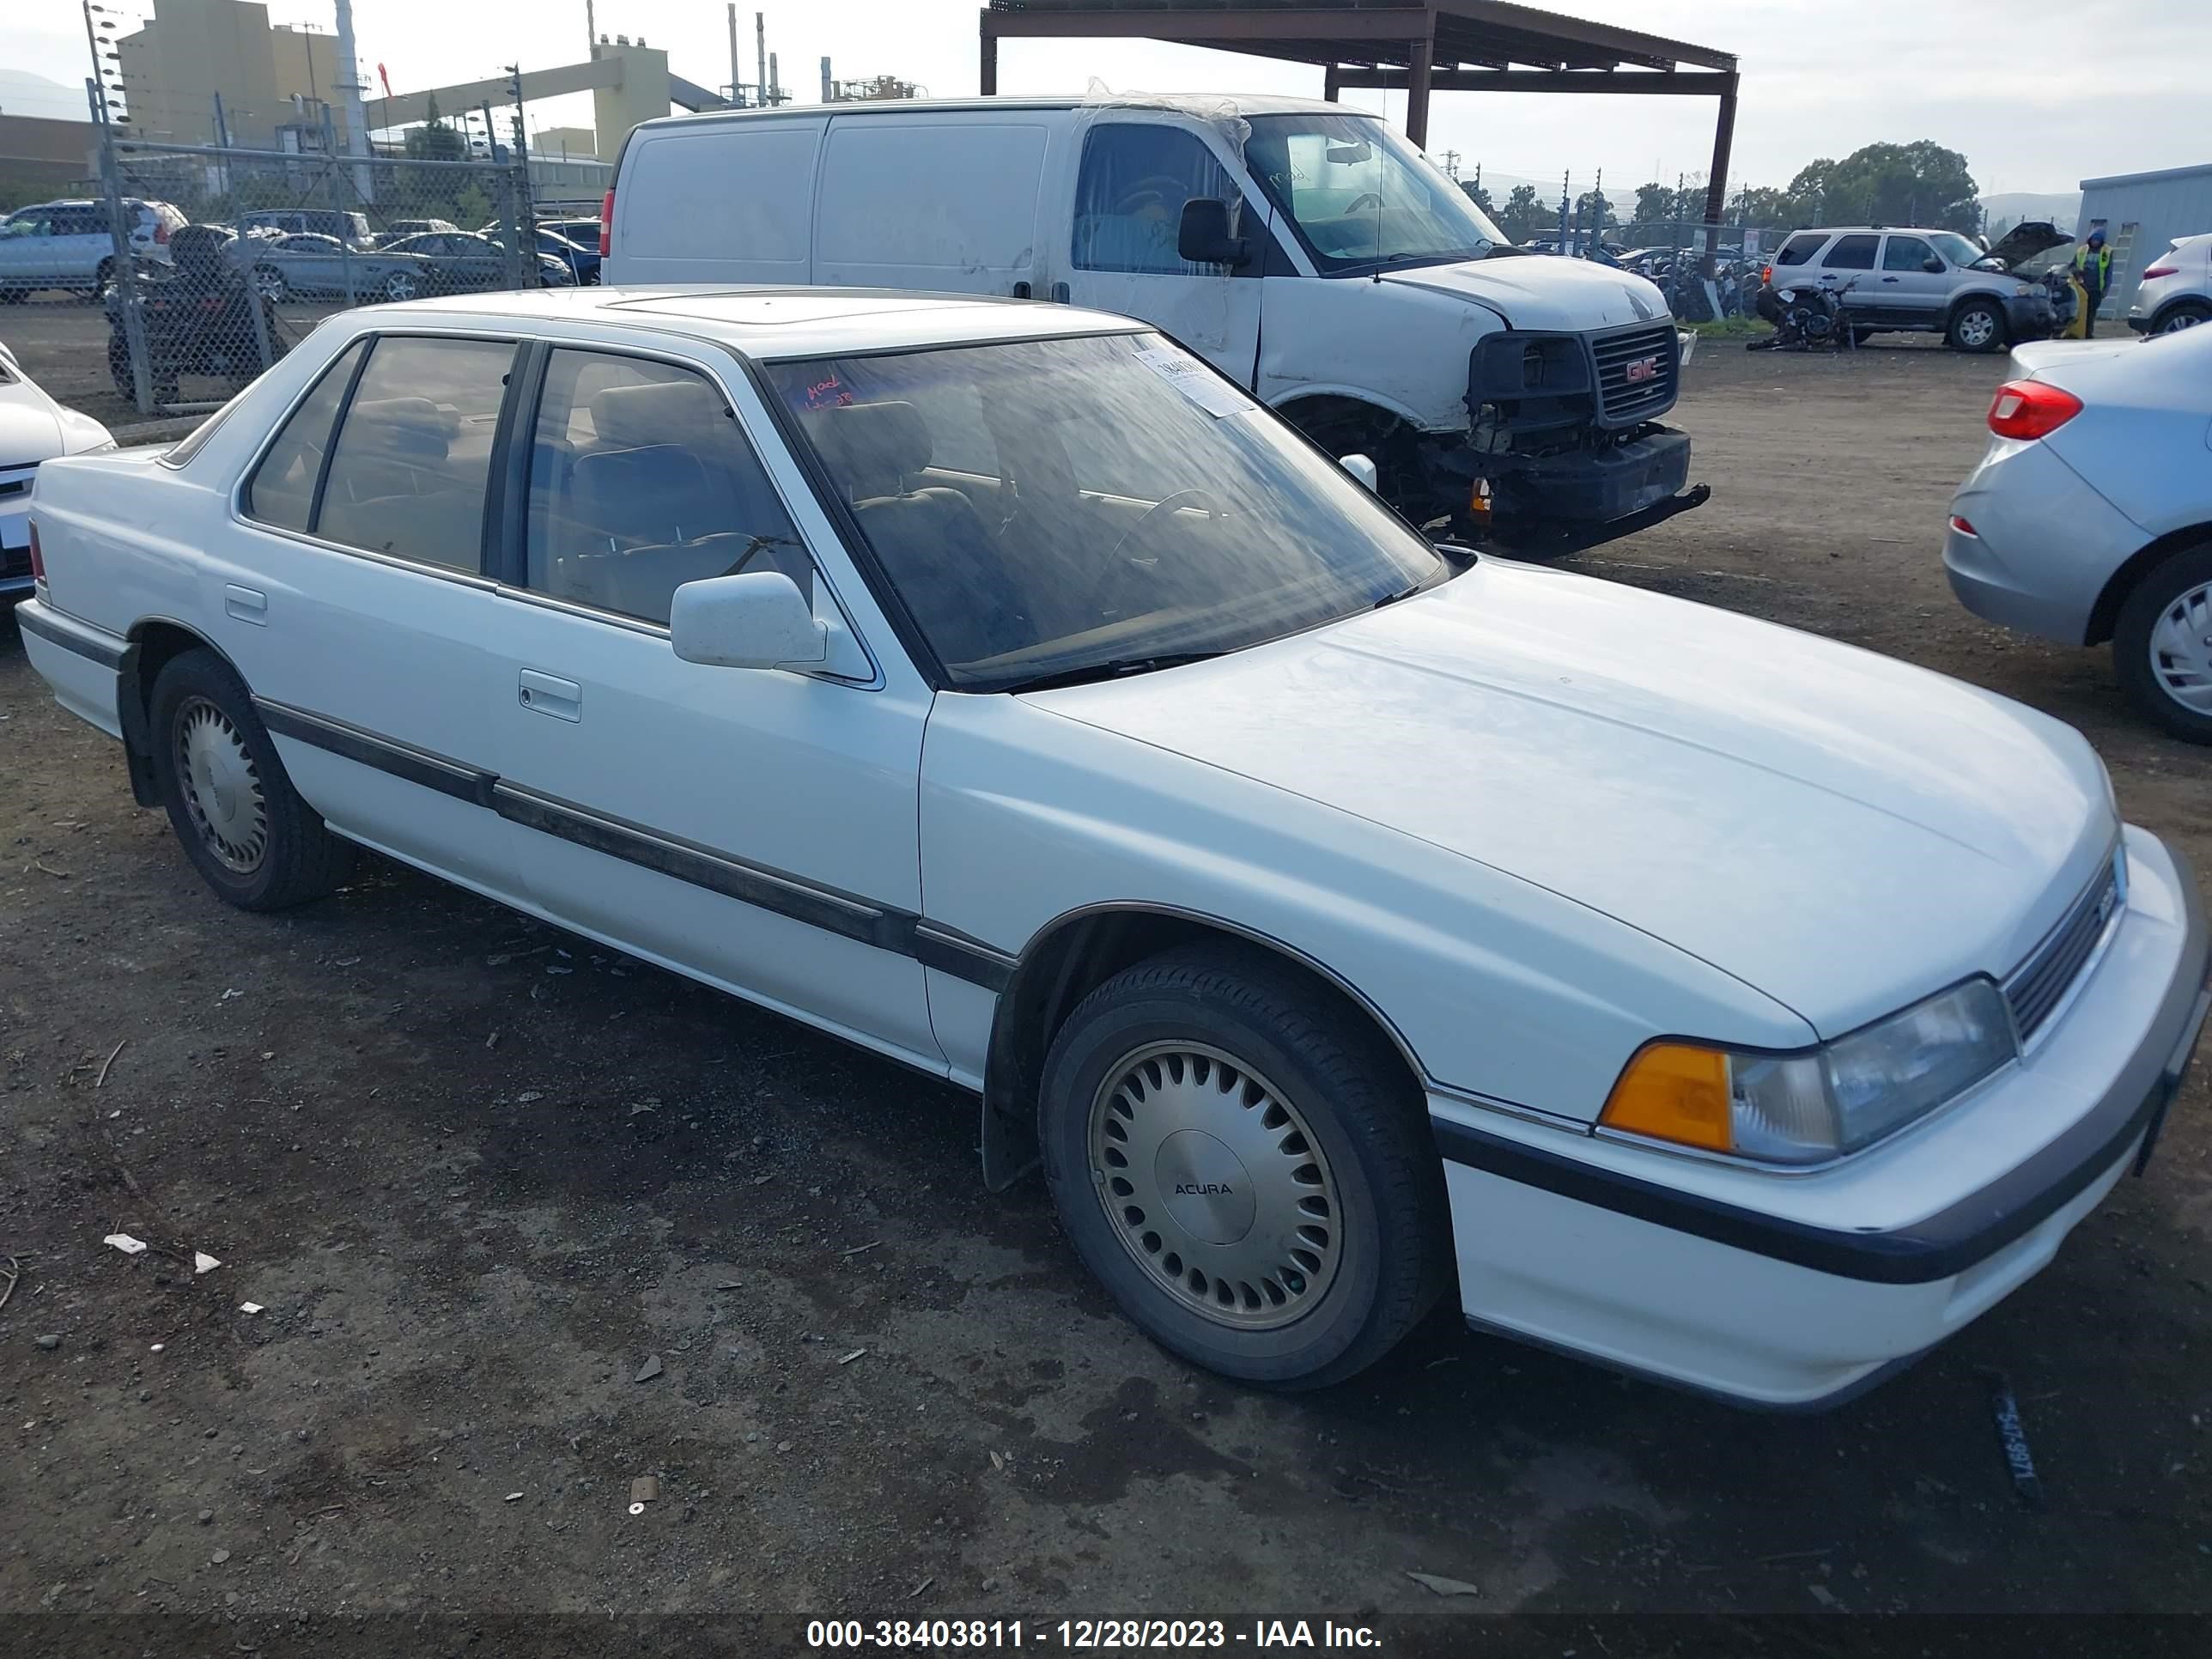 vin: JH4KA4665LC041413 JH4KA4665LC041413 1990 acura legend 2700 for Sale in 94565, 2780 Willow Pass Road, Bay Point, California, USA